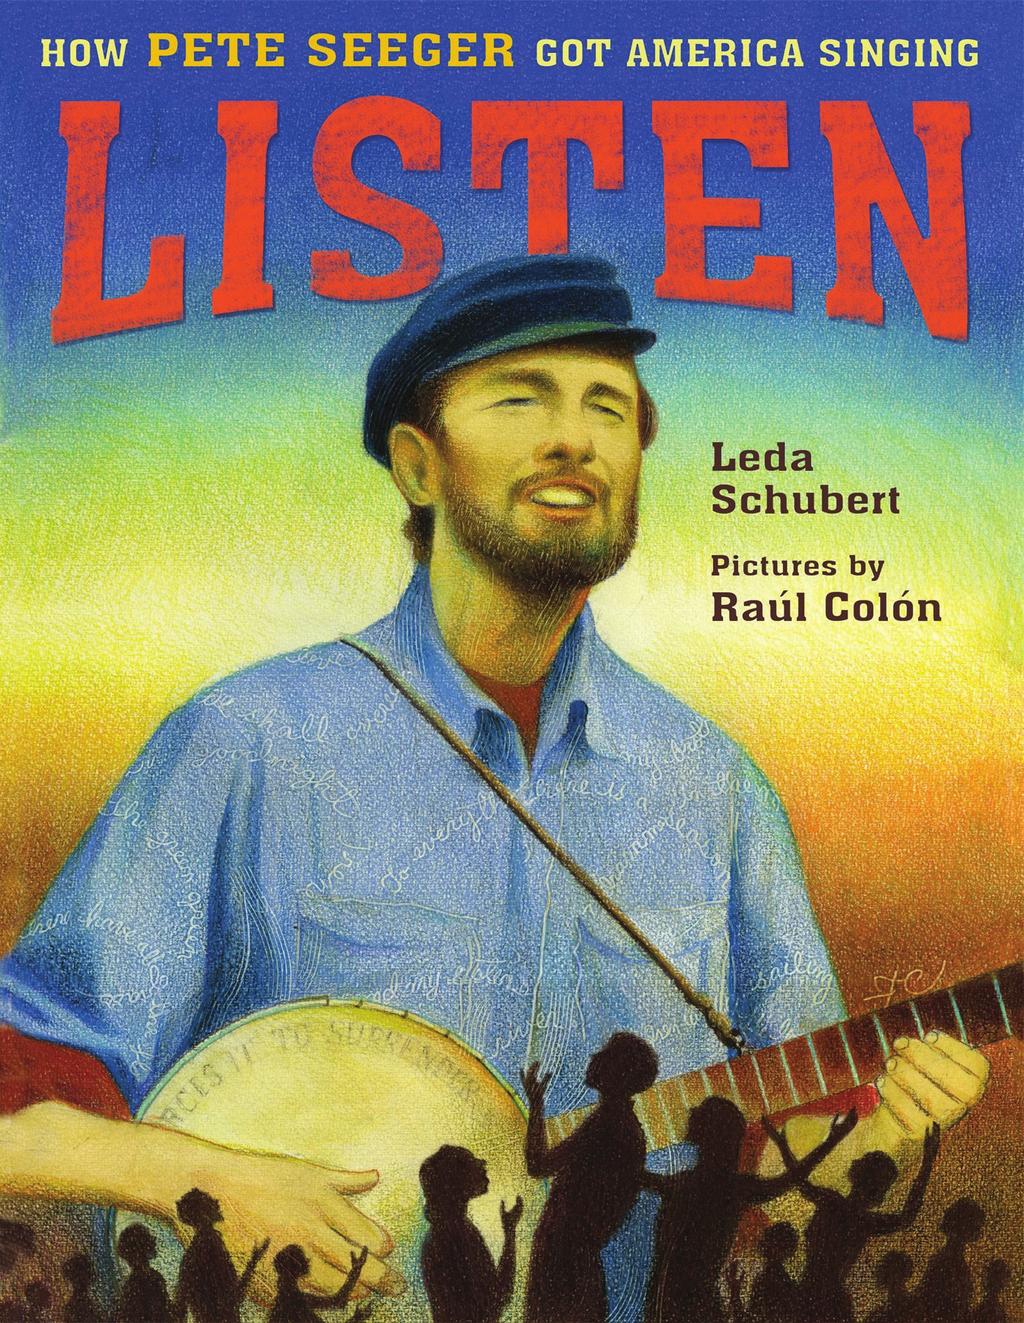 From singing sold-out concerts to courageously standing against McCarthy-era finger pointing, Pete Seeger s inspiring life and an important period of